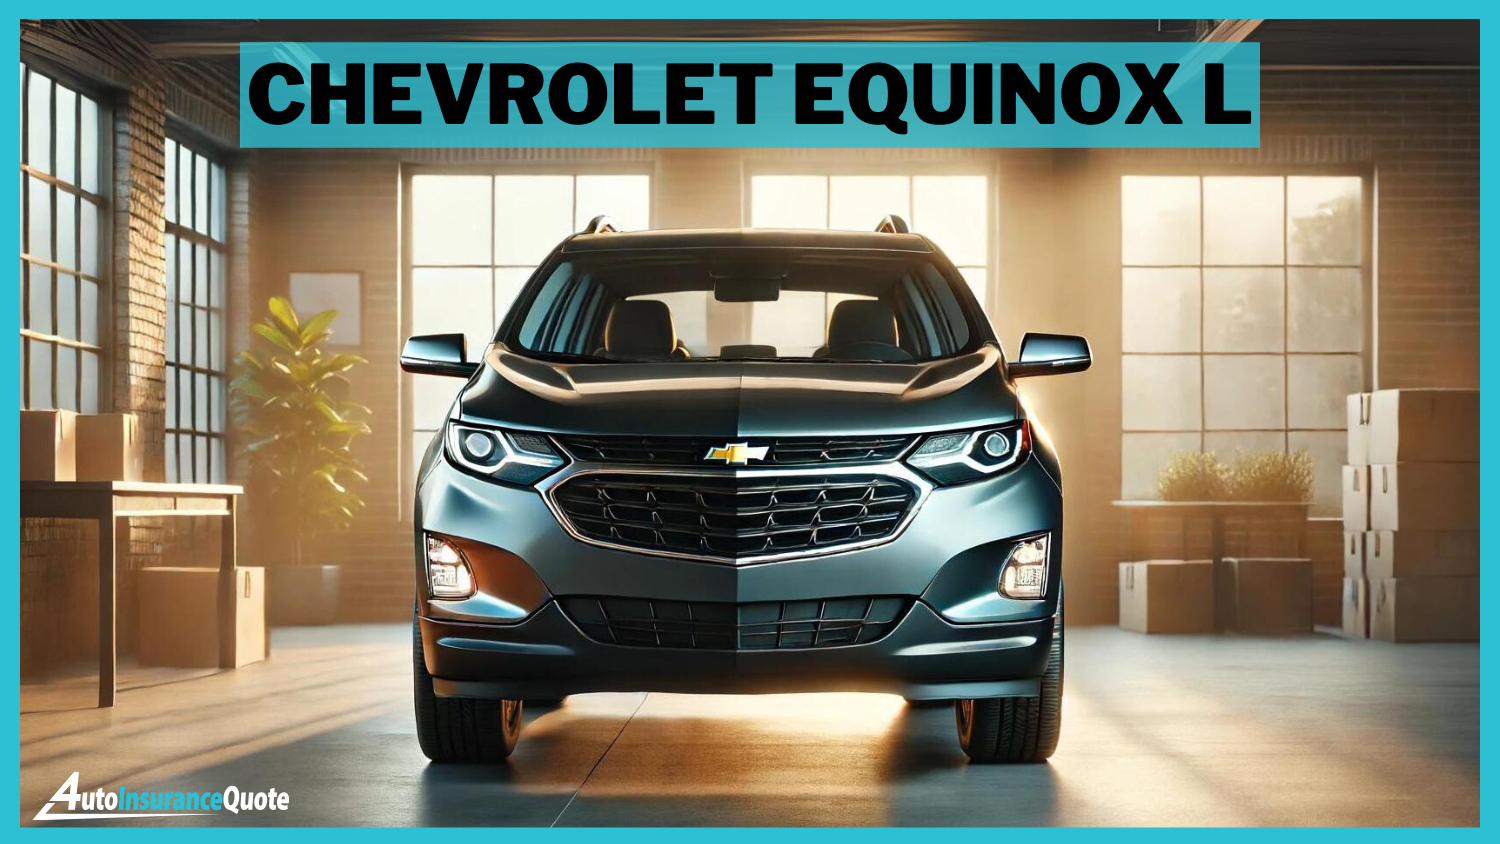 Chevrolet Equinox L: Cheapest Cars for 17-Year-Olds to Insure